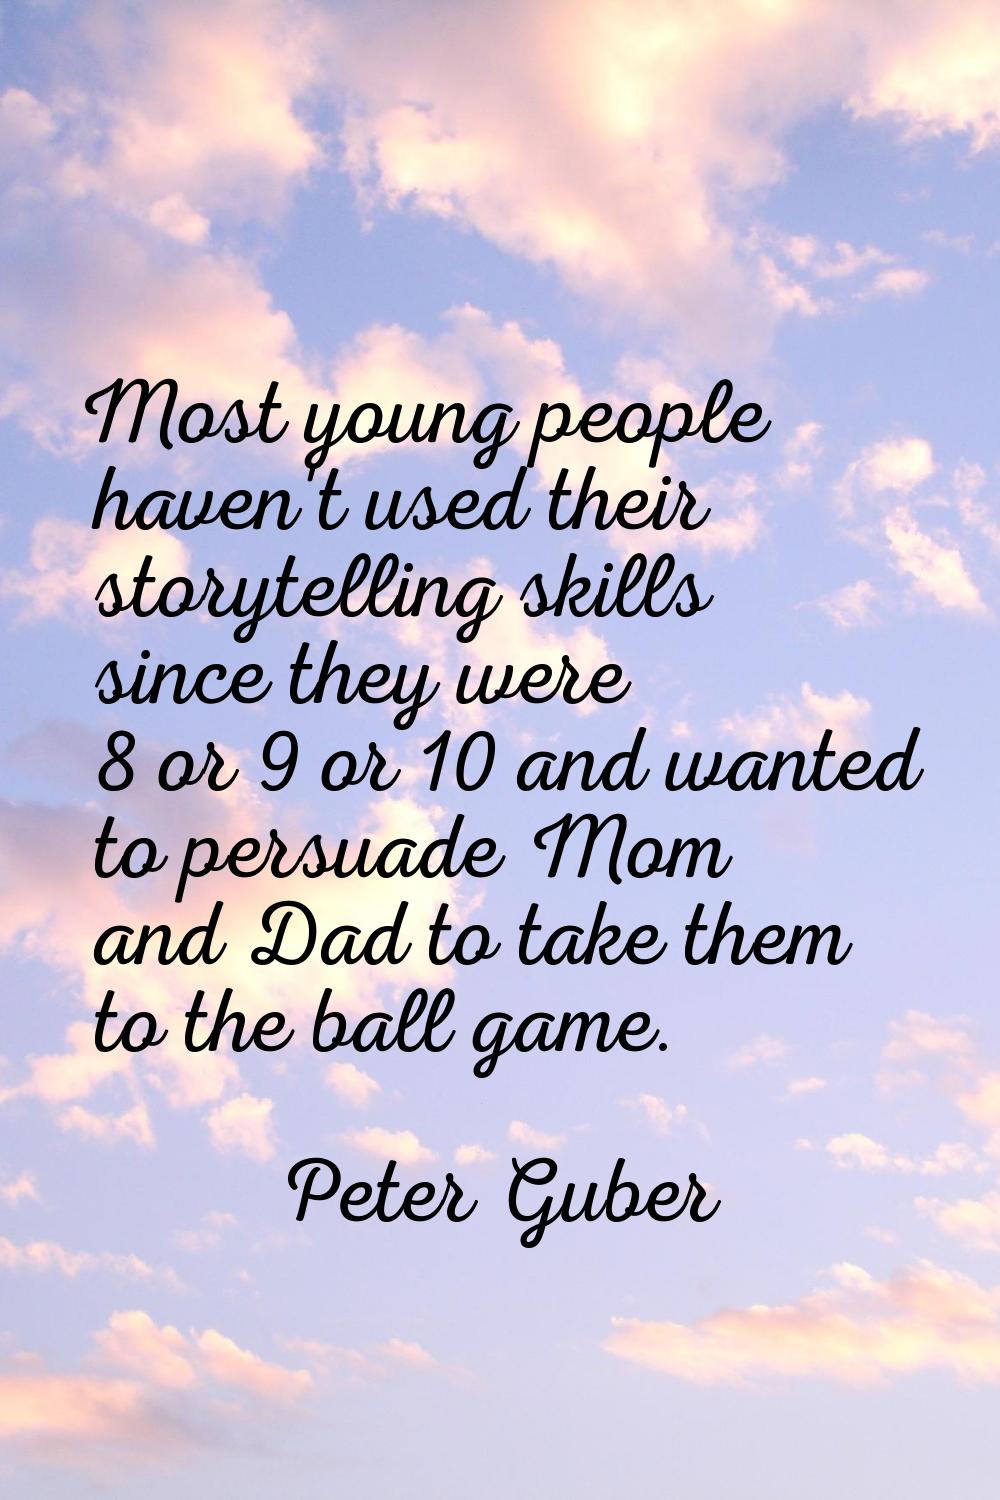 Most young people haven't used their storytelling skills since they were 8 or 9 or 10 and wanted to